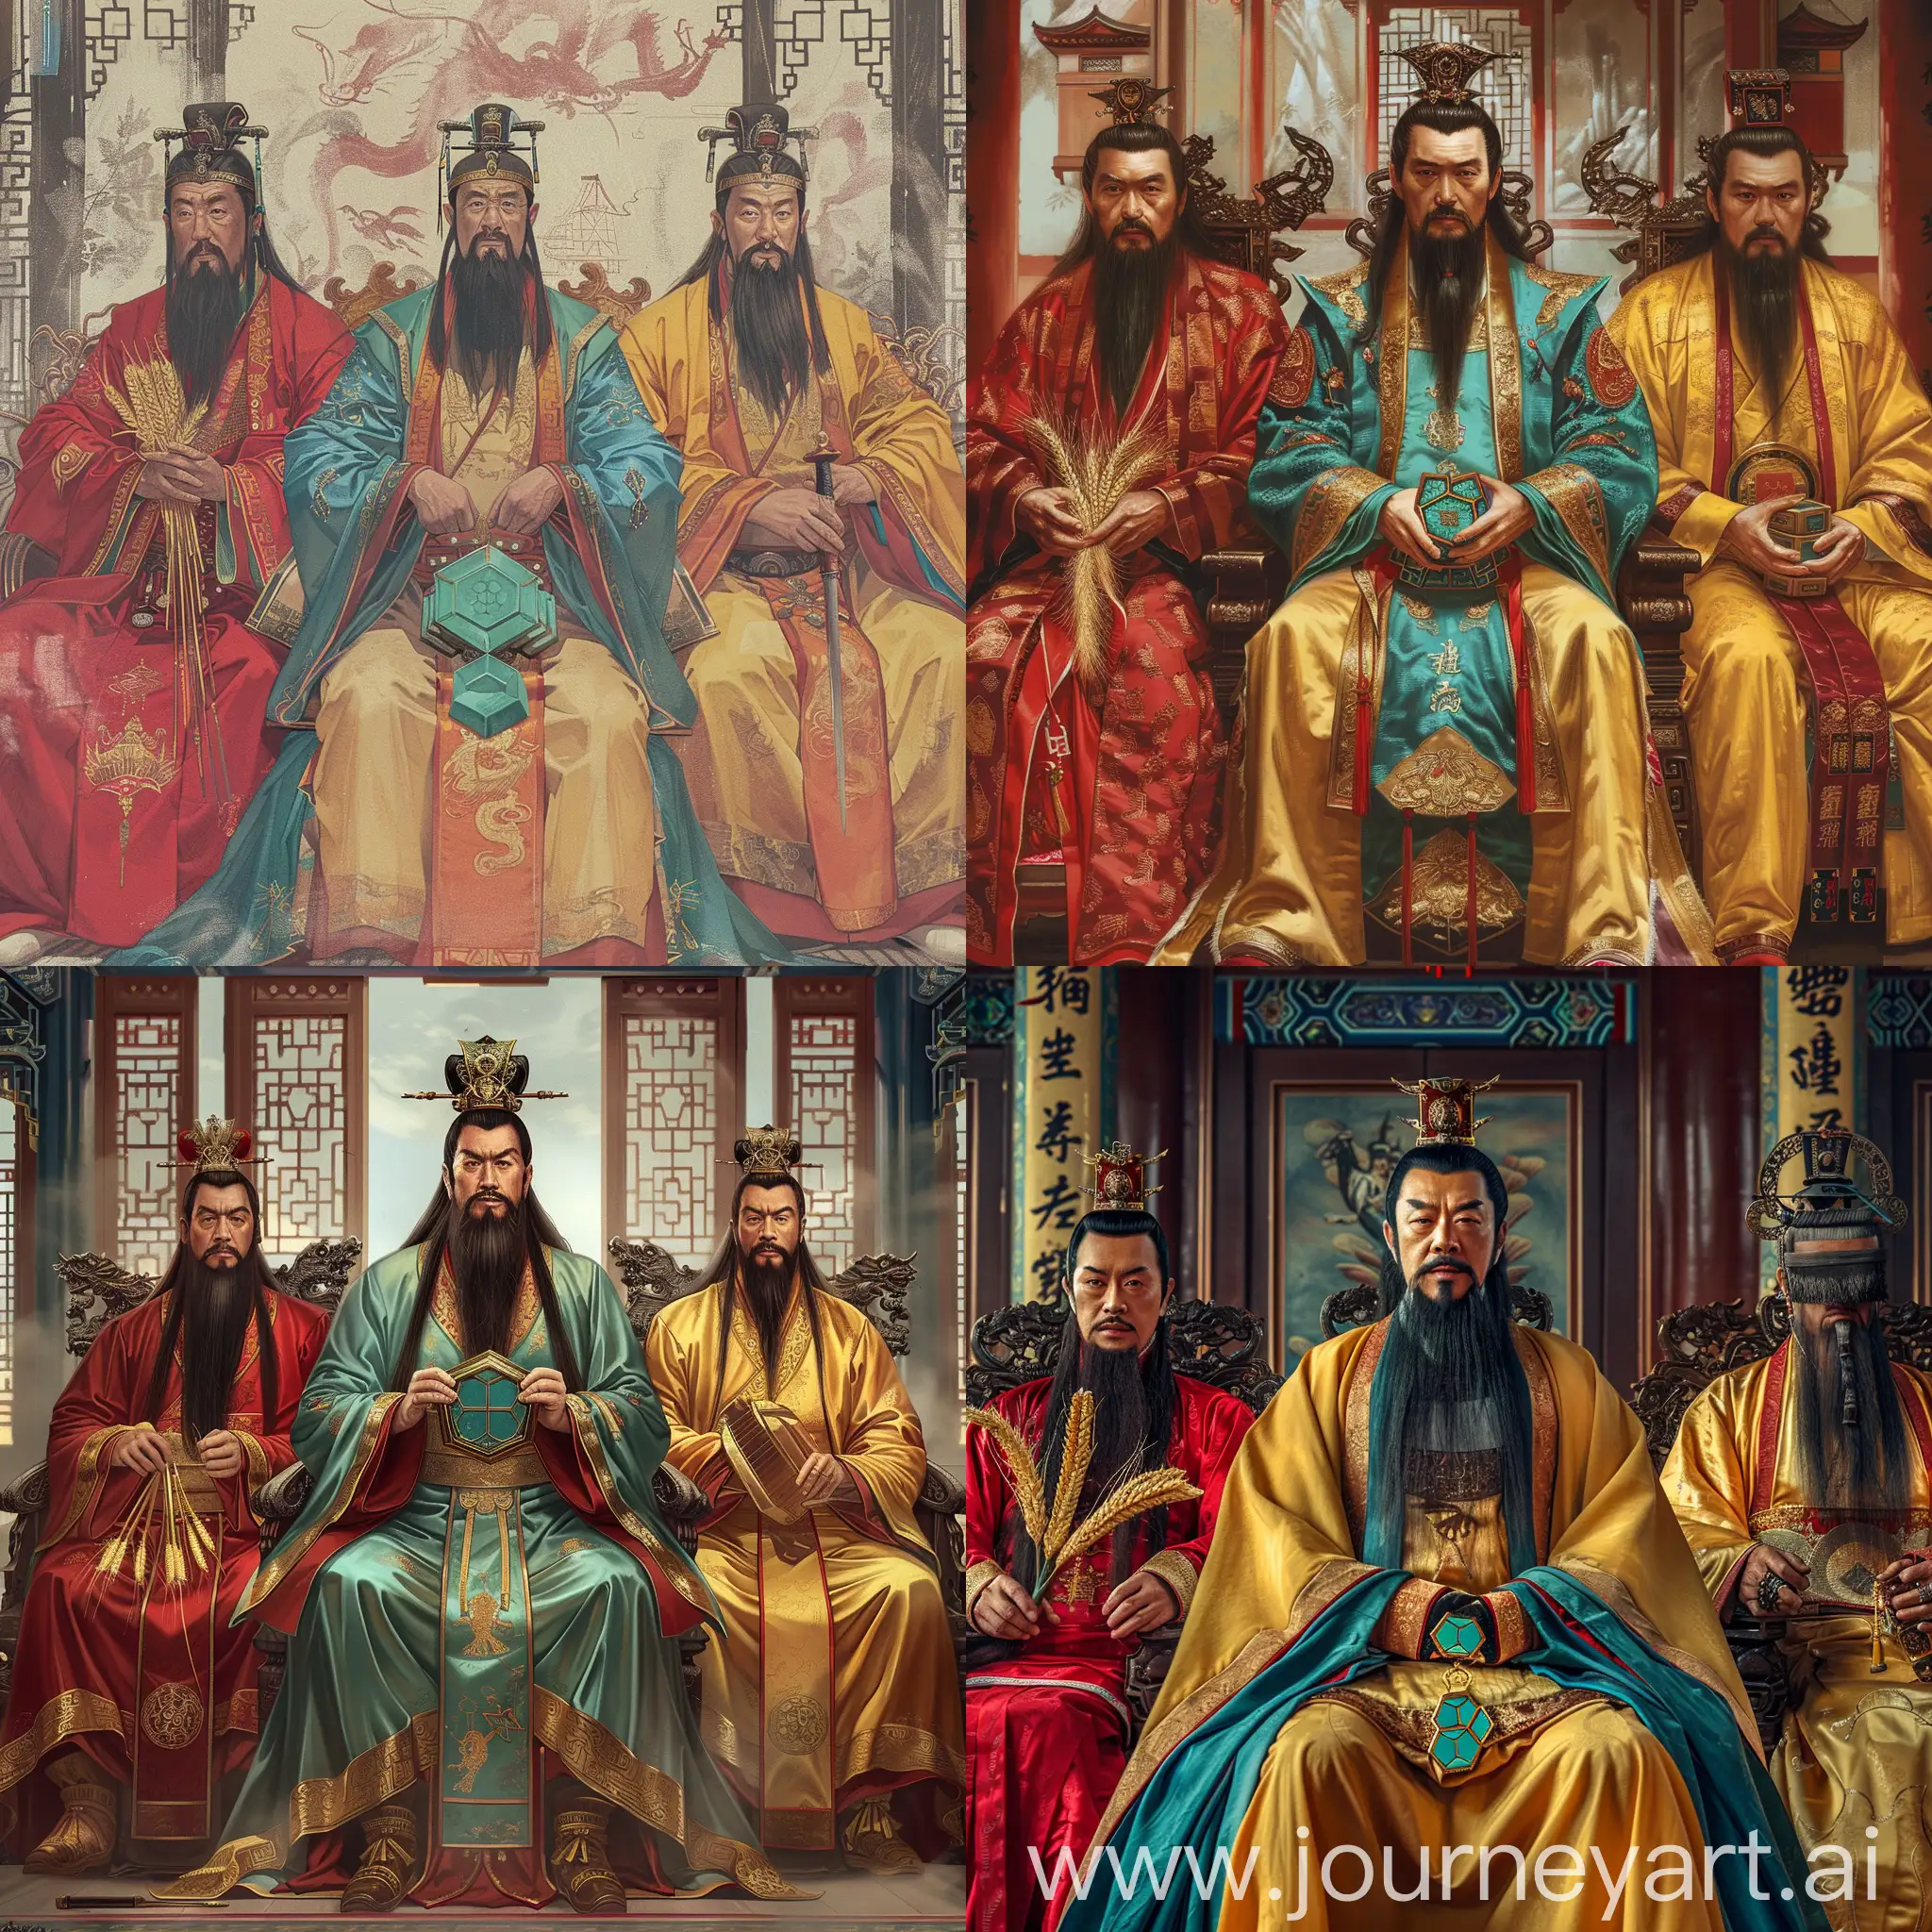 three middle-aged elegant Chinese emperors Tang Taizong with long black beards are sitting on their imperial thrones,

the first left one in red imperial clothes has a  wheat ear in his hands,

the second middle one in turquoise imperial clothes has a turquoise bronze hexagon in his hands,

the third right one in yellow imperial clothes has a Chinese style sword in his hands,

they are all inside a splendid Chinese Palace,